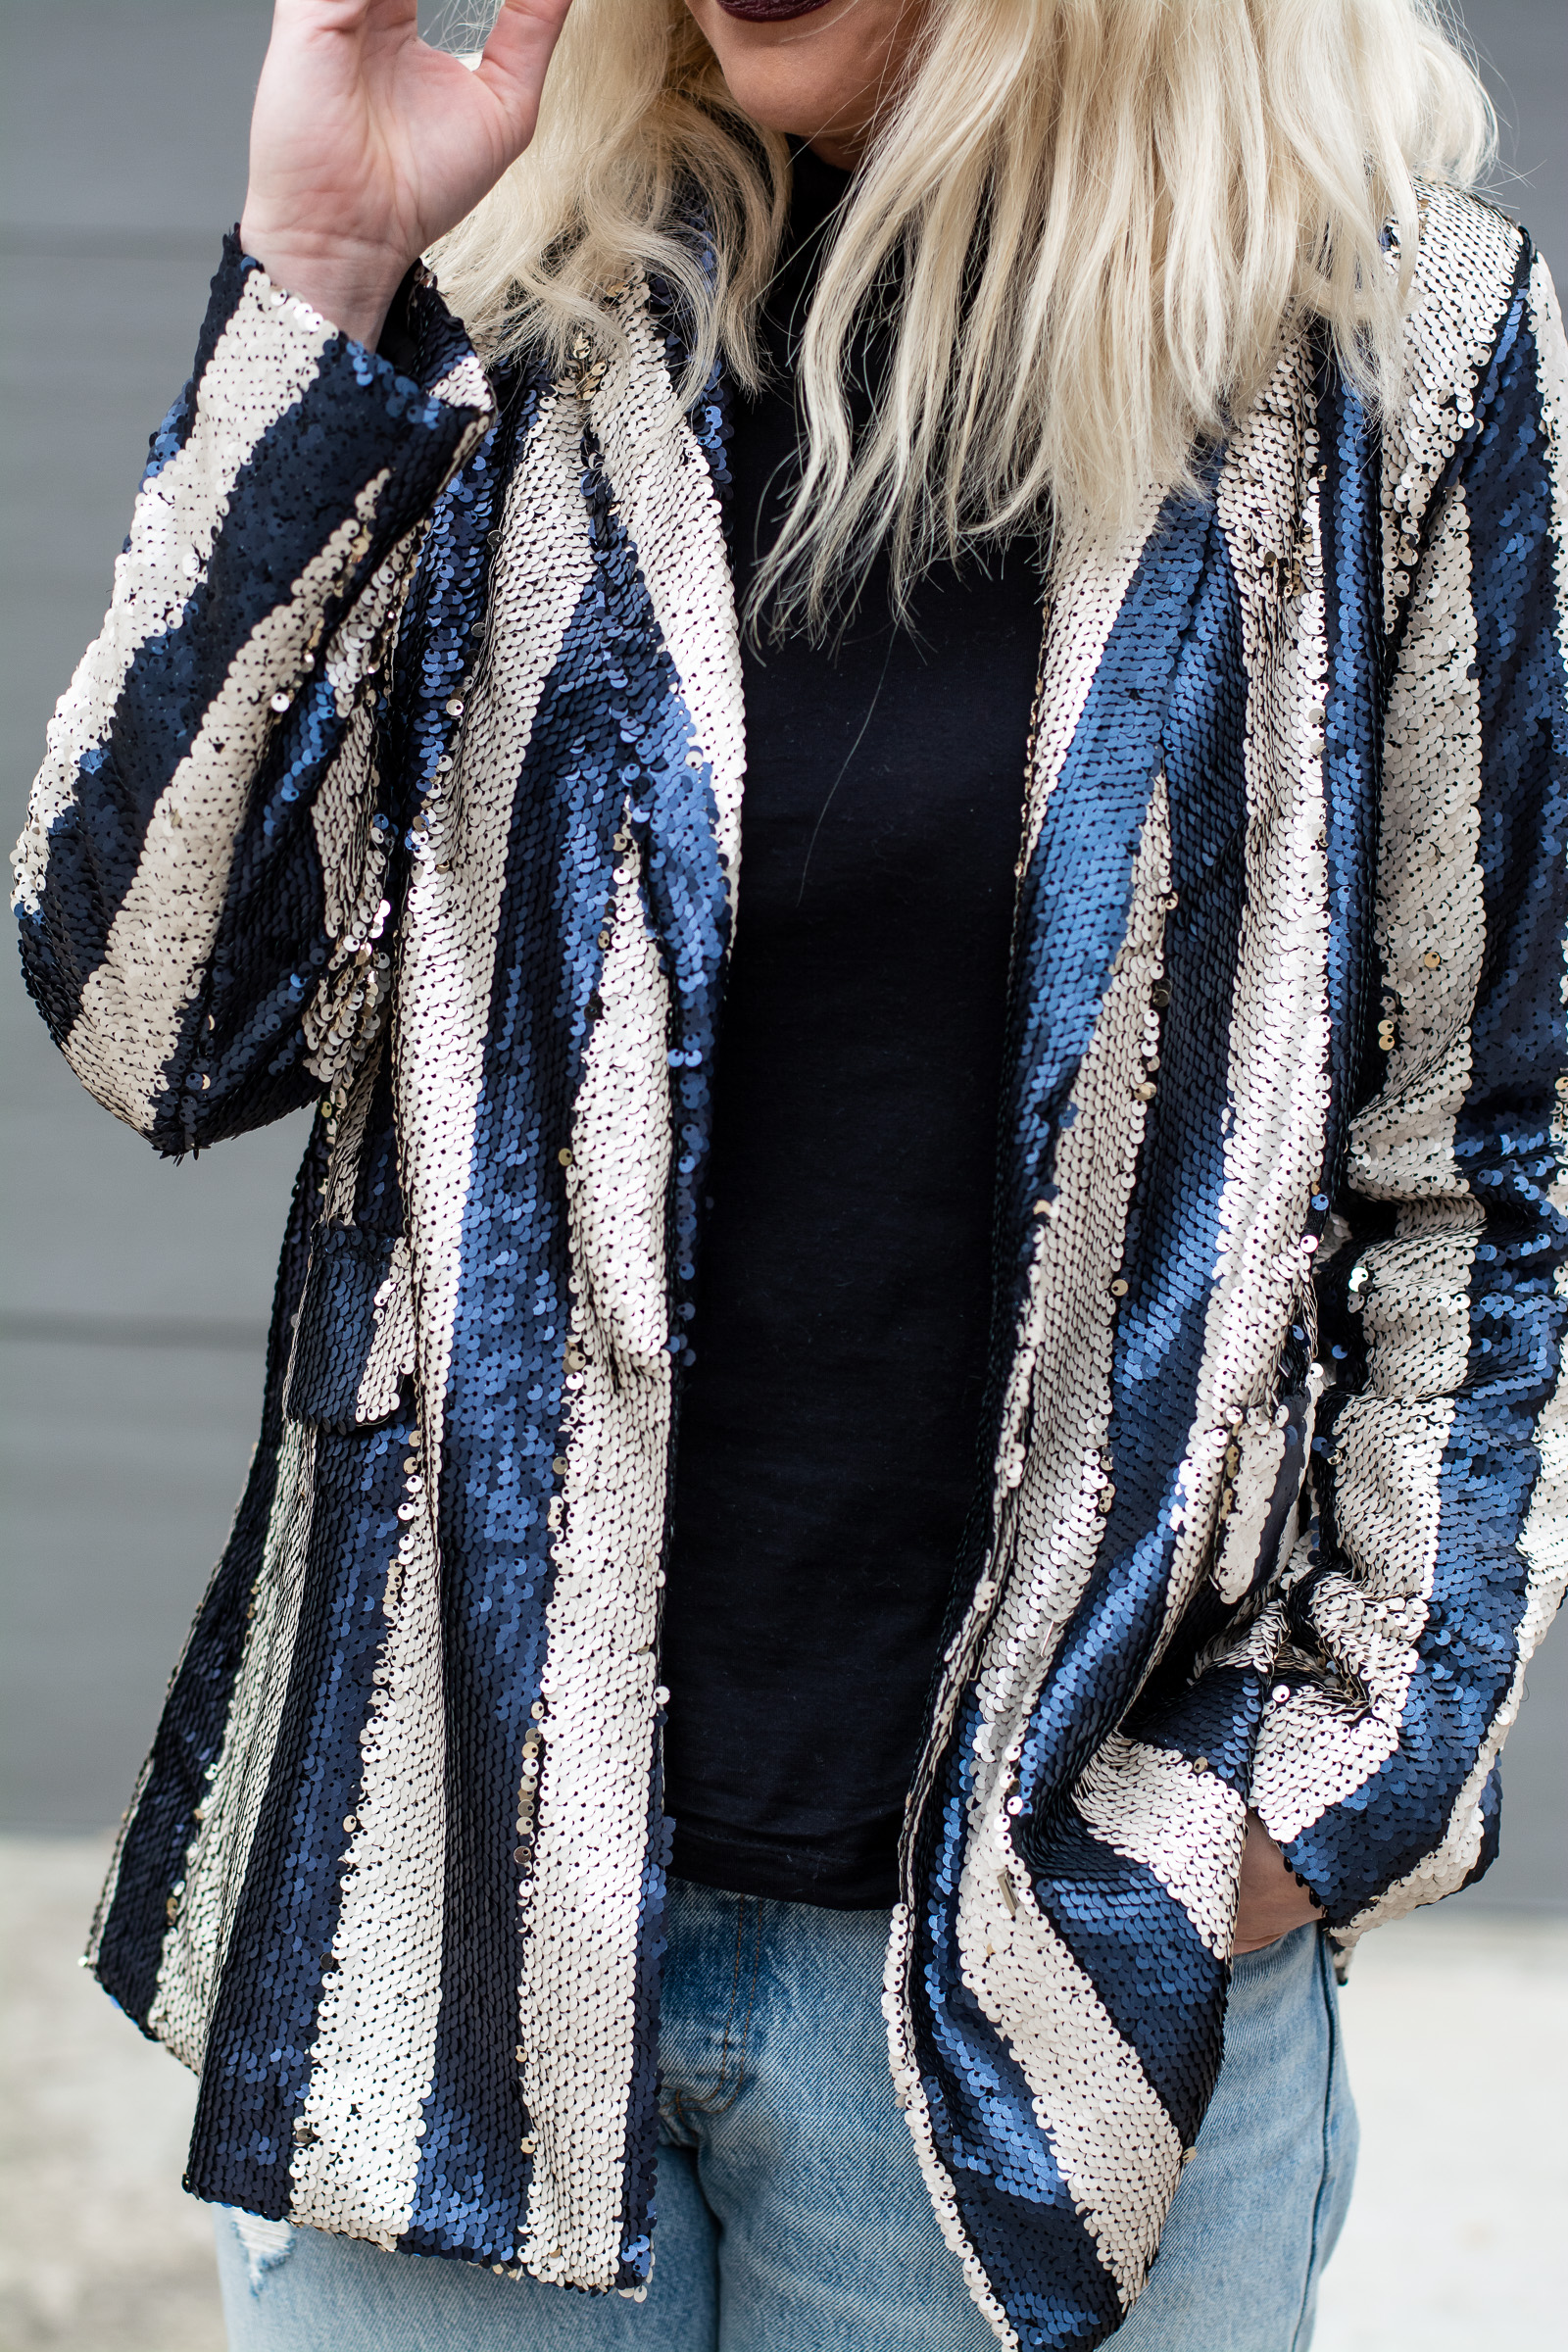 Striped Sequined Blazer for Day. | Ash from LSR